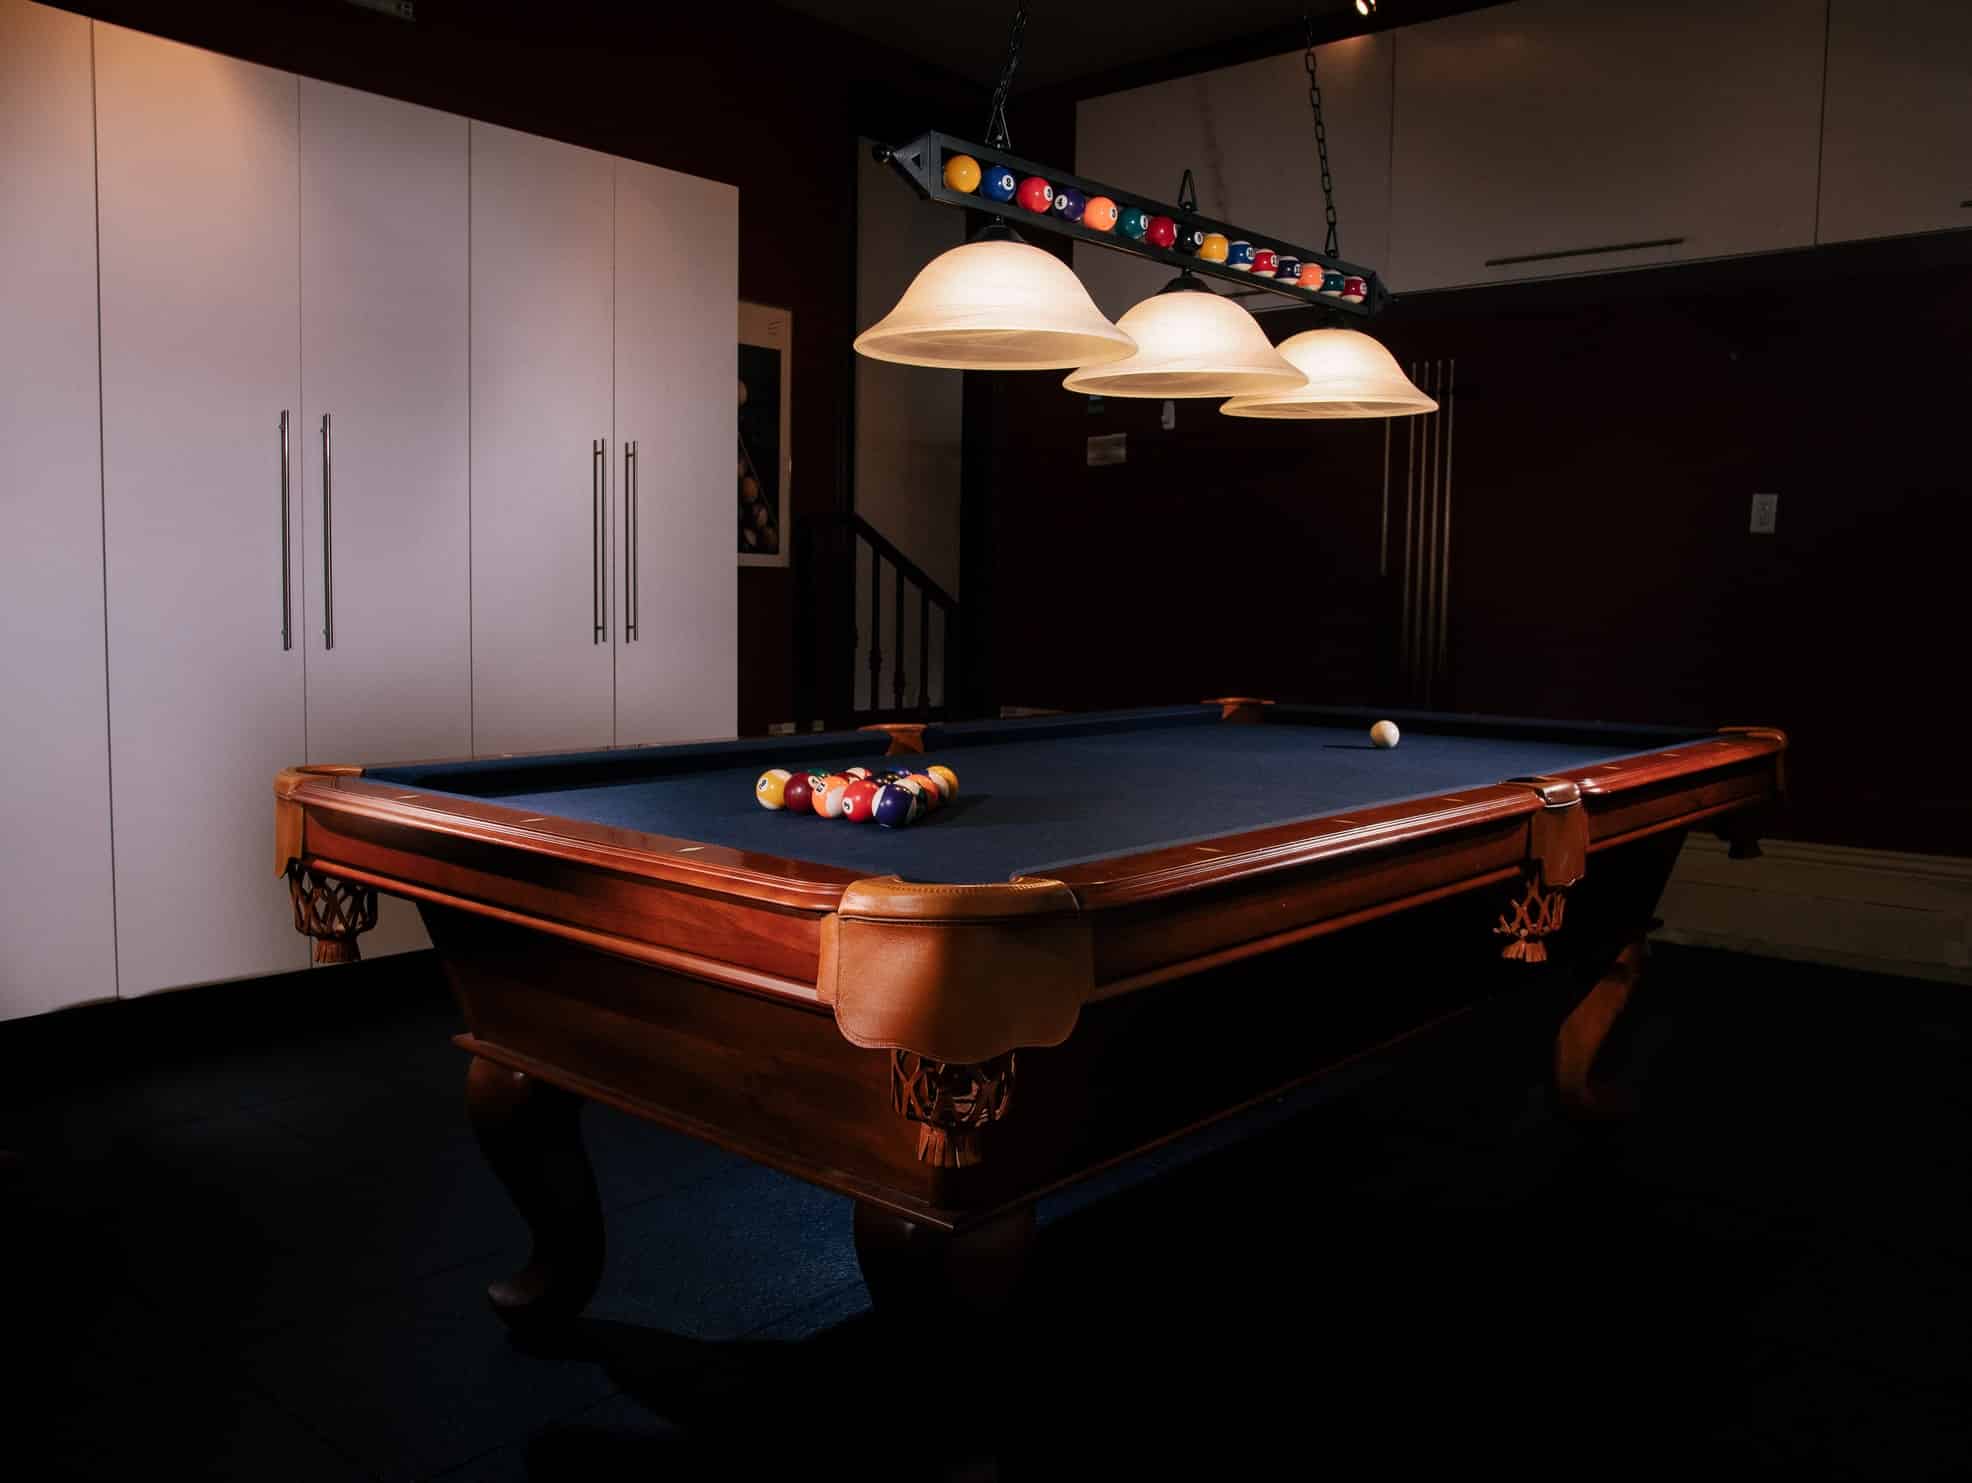 How Much Room Do You Need For a Pool Table?